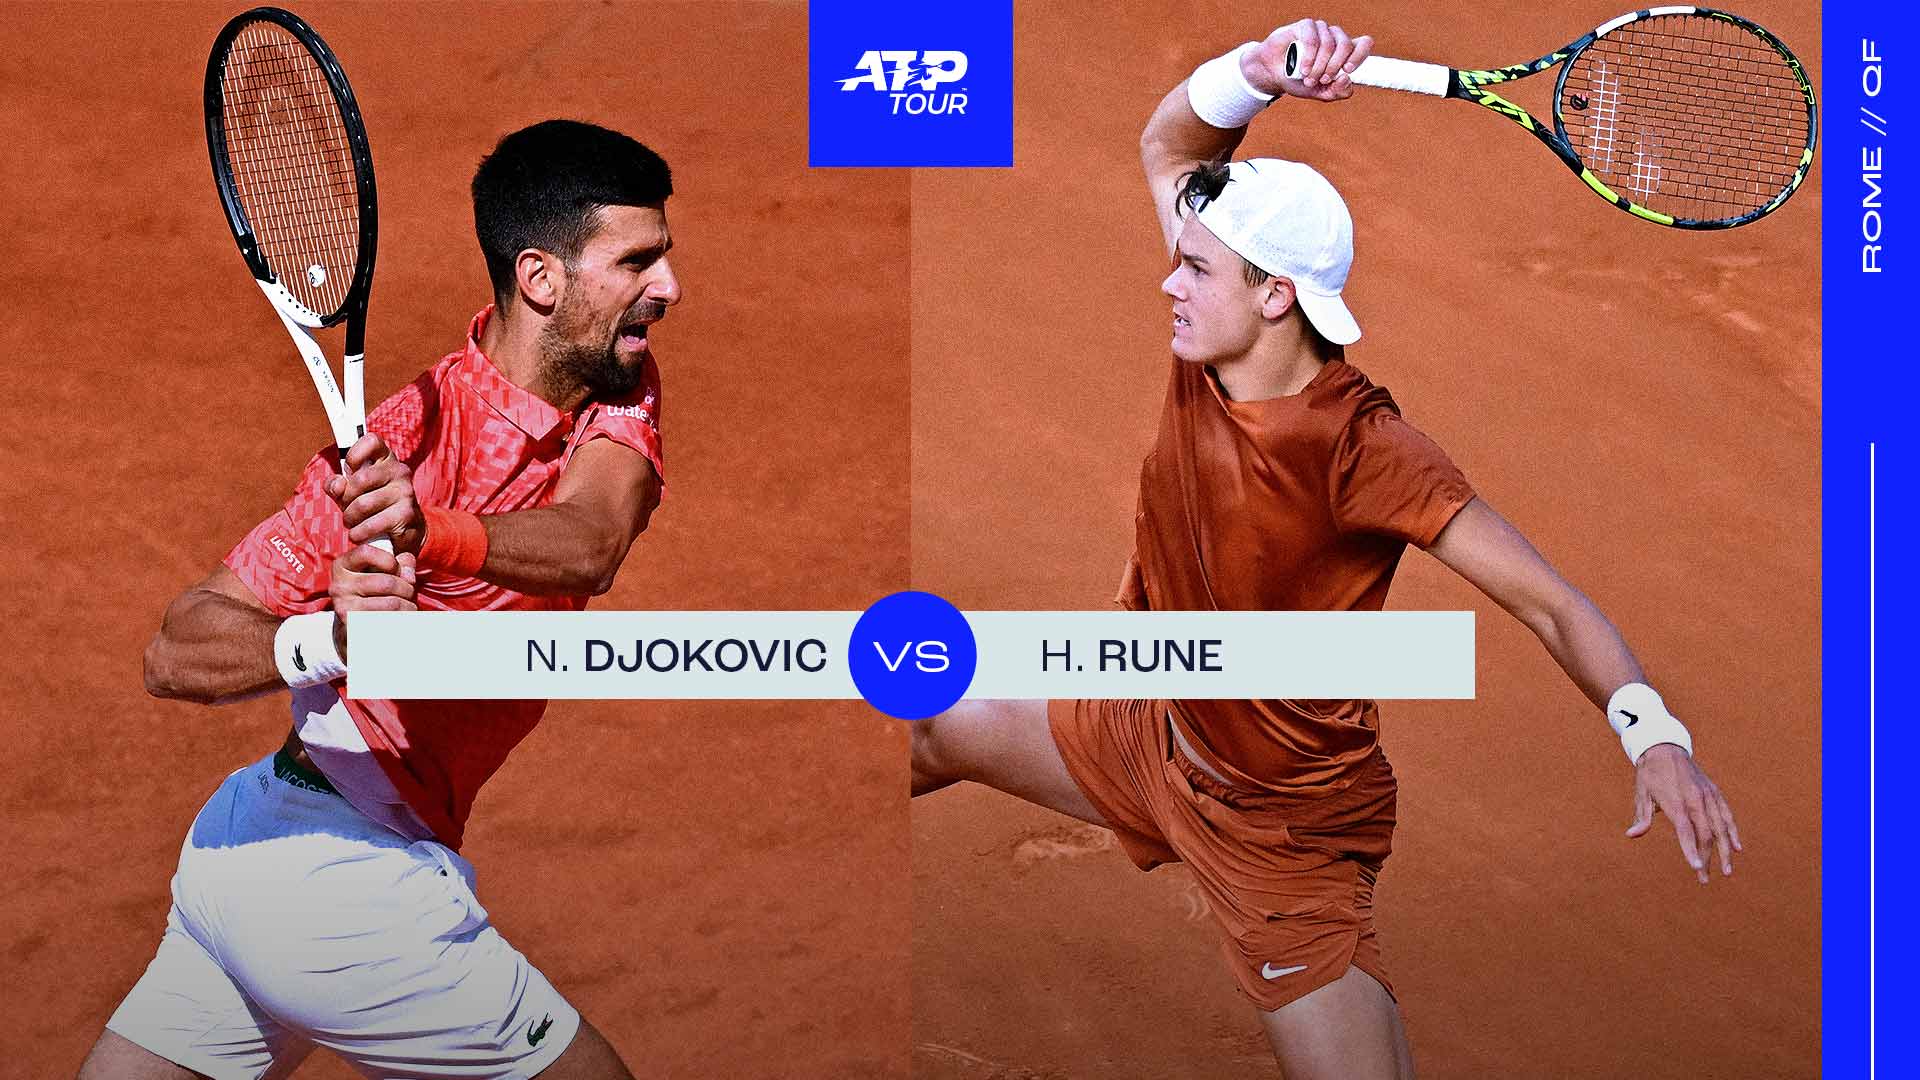 Novak Djokovic and Holger Rune are locked at 1-1 in their ATP Head2Head series.